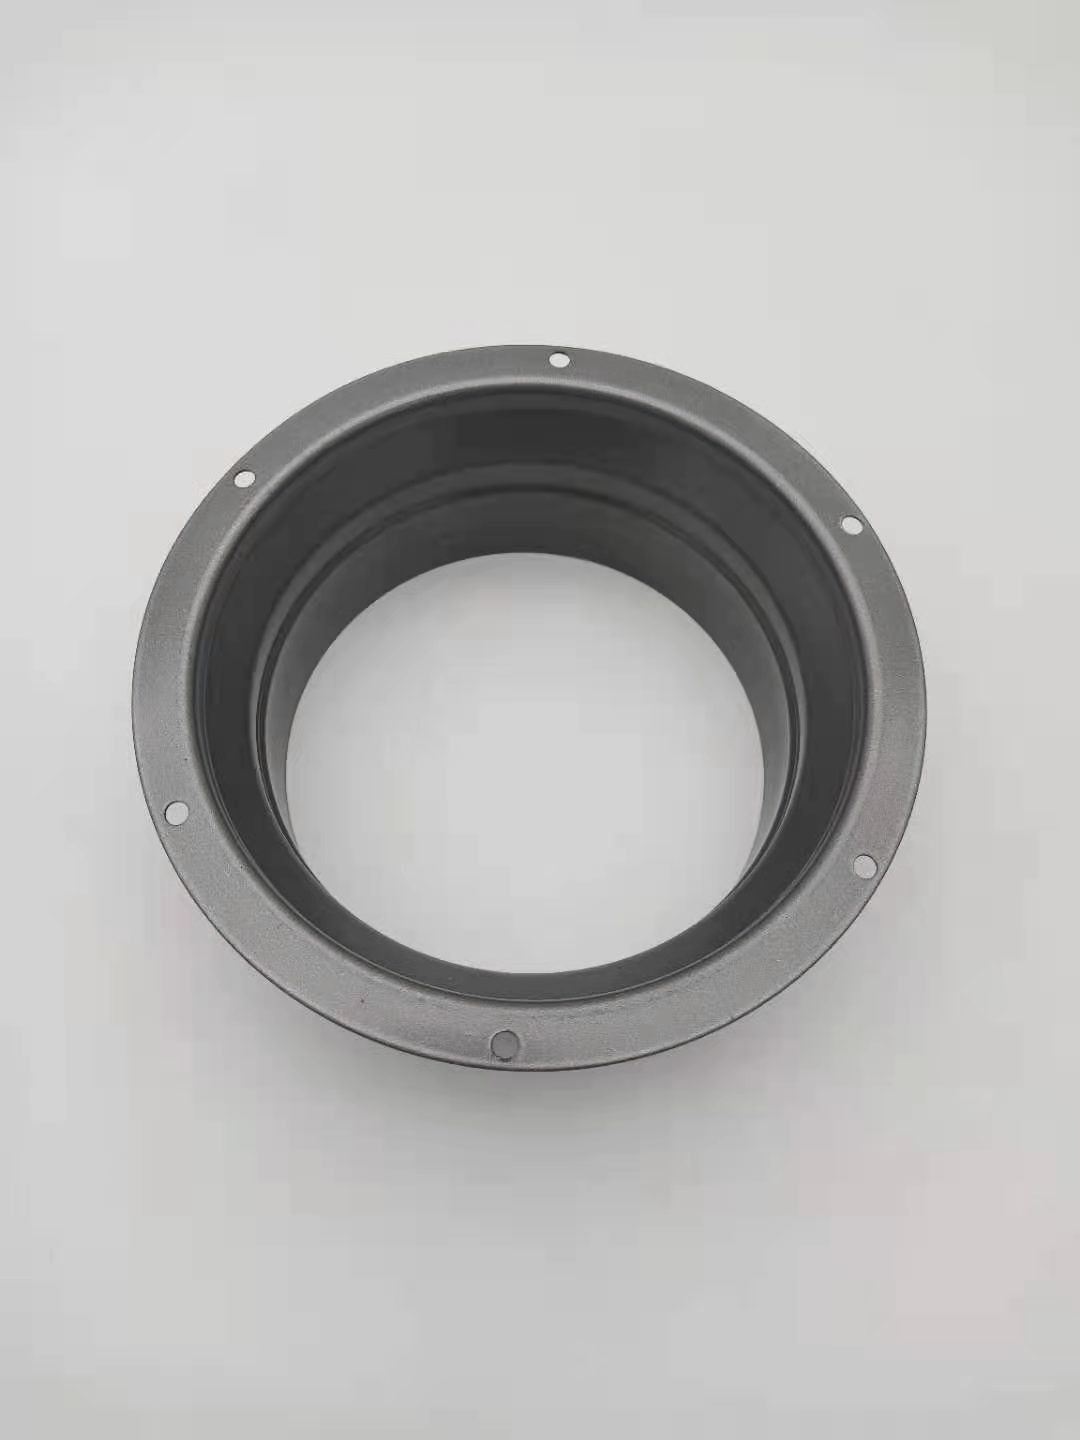 New Air System Flange Interface 100, Black Plastic Straight Dryer Vent Wall Plate Wall Trim Pipe Collar, for Heating Cooling Ventilation System